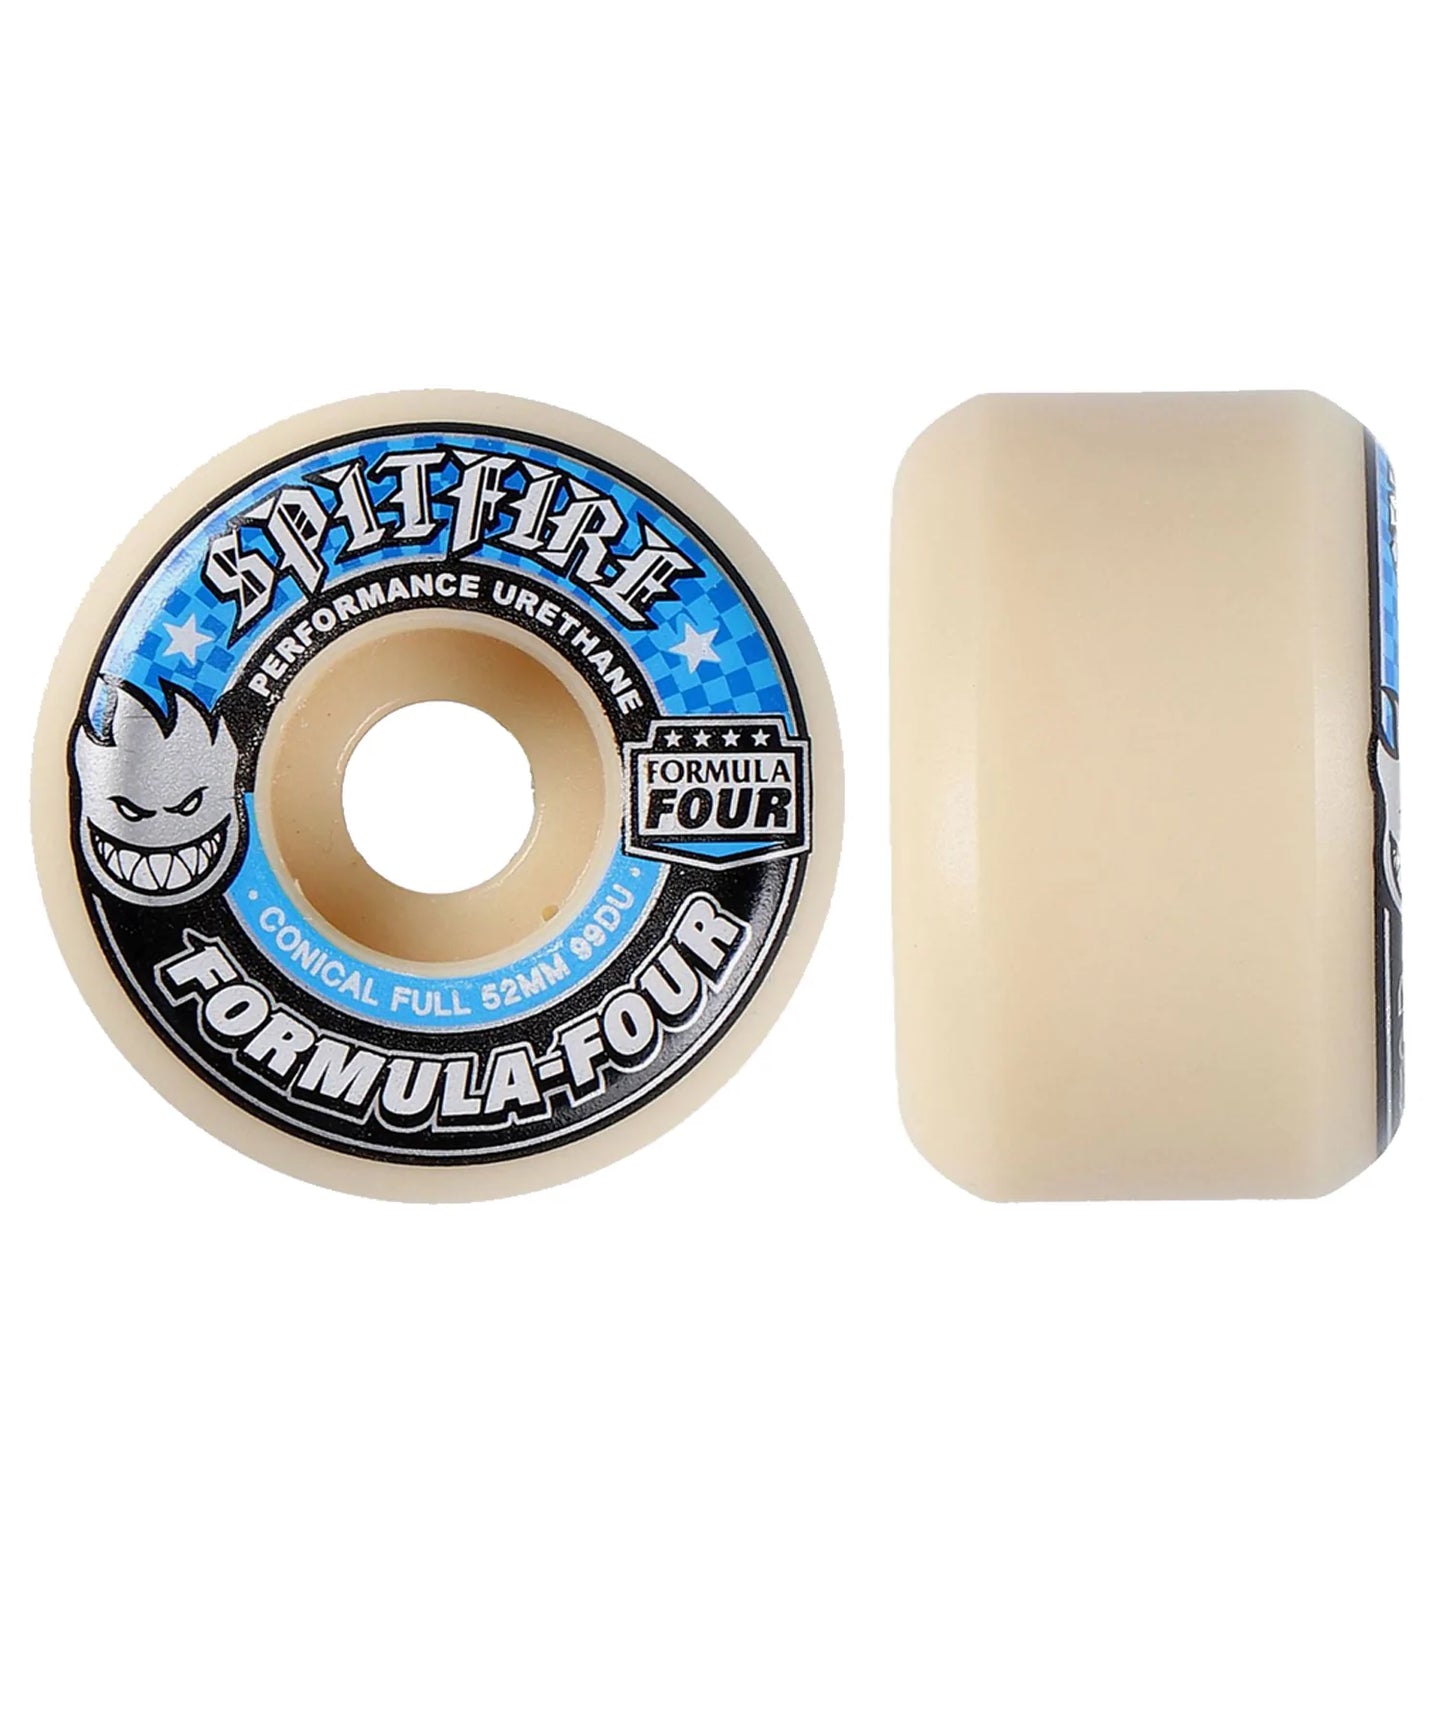 SPITFIRE FORMULA FOUR 99A - CONICAL FULL